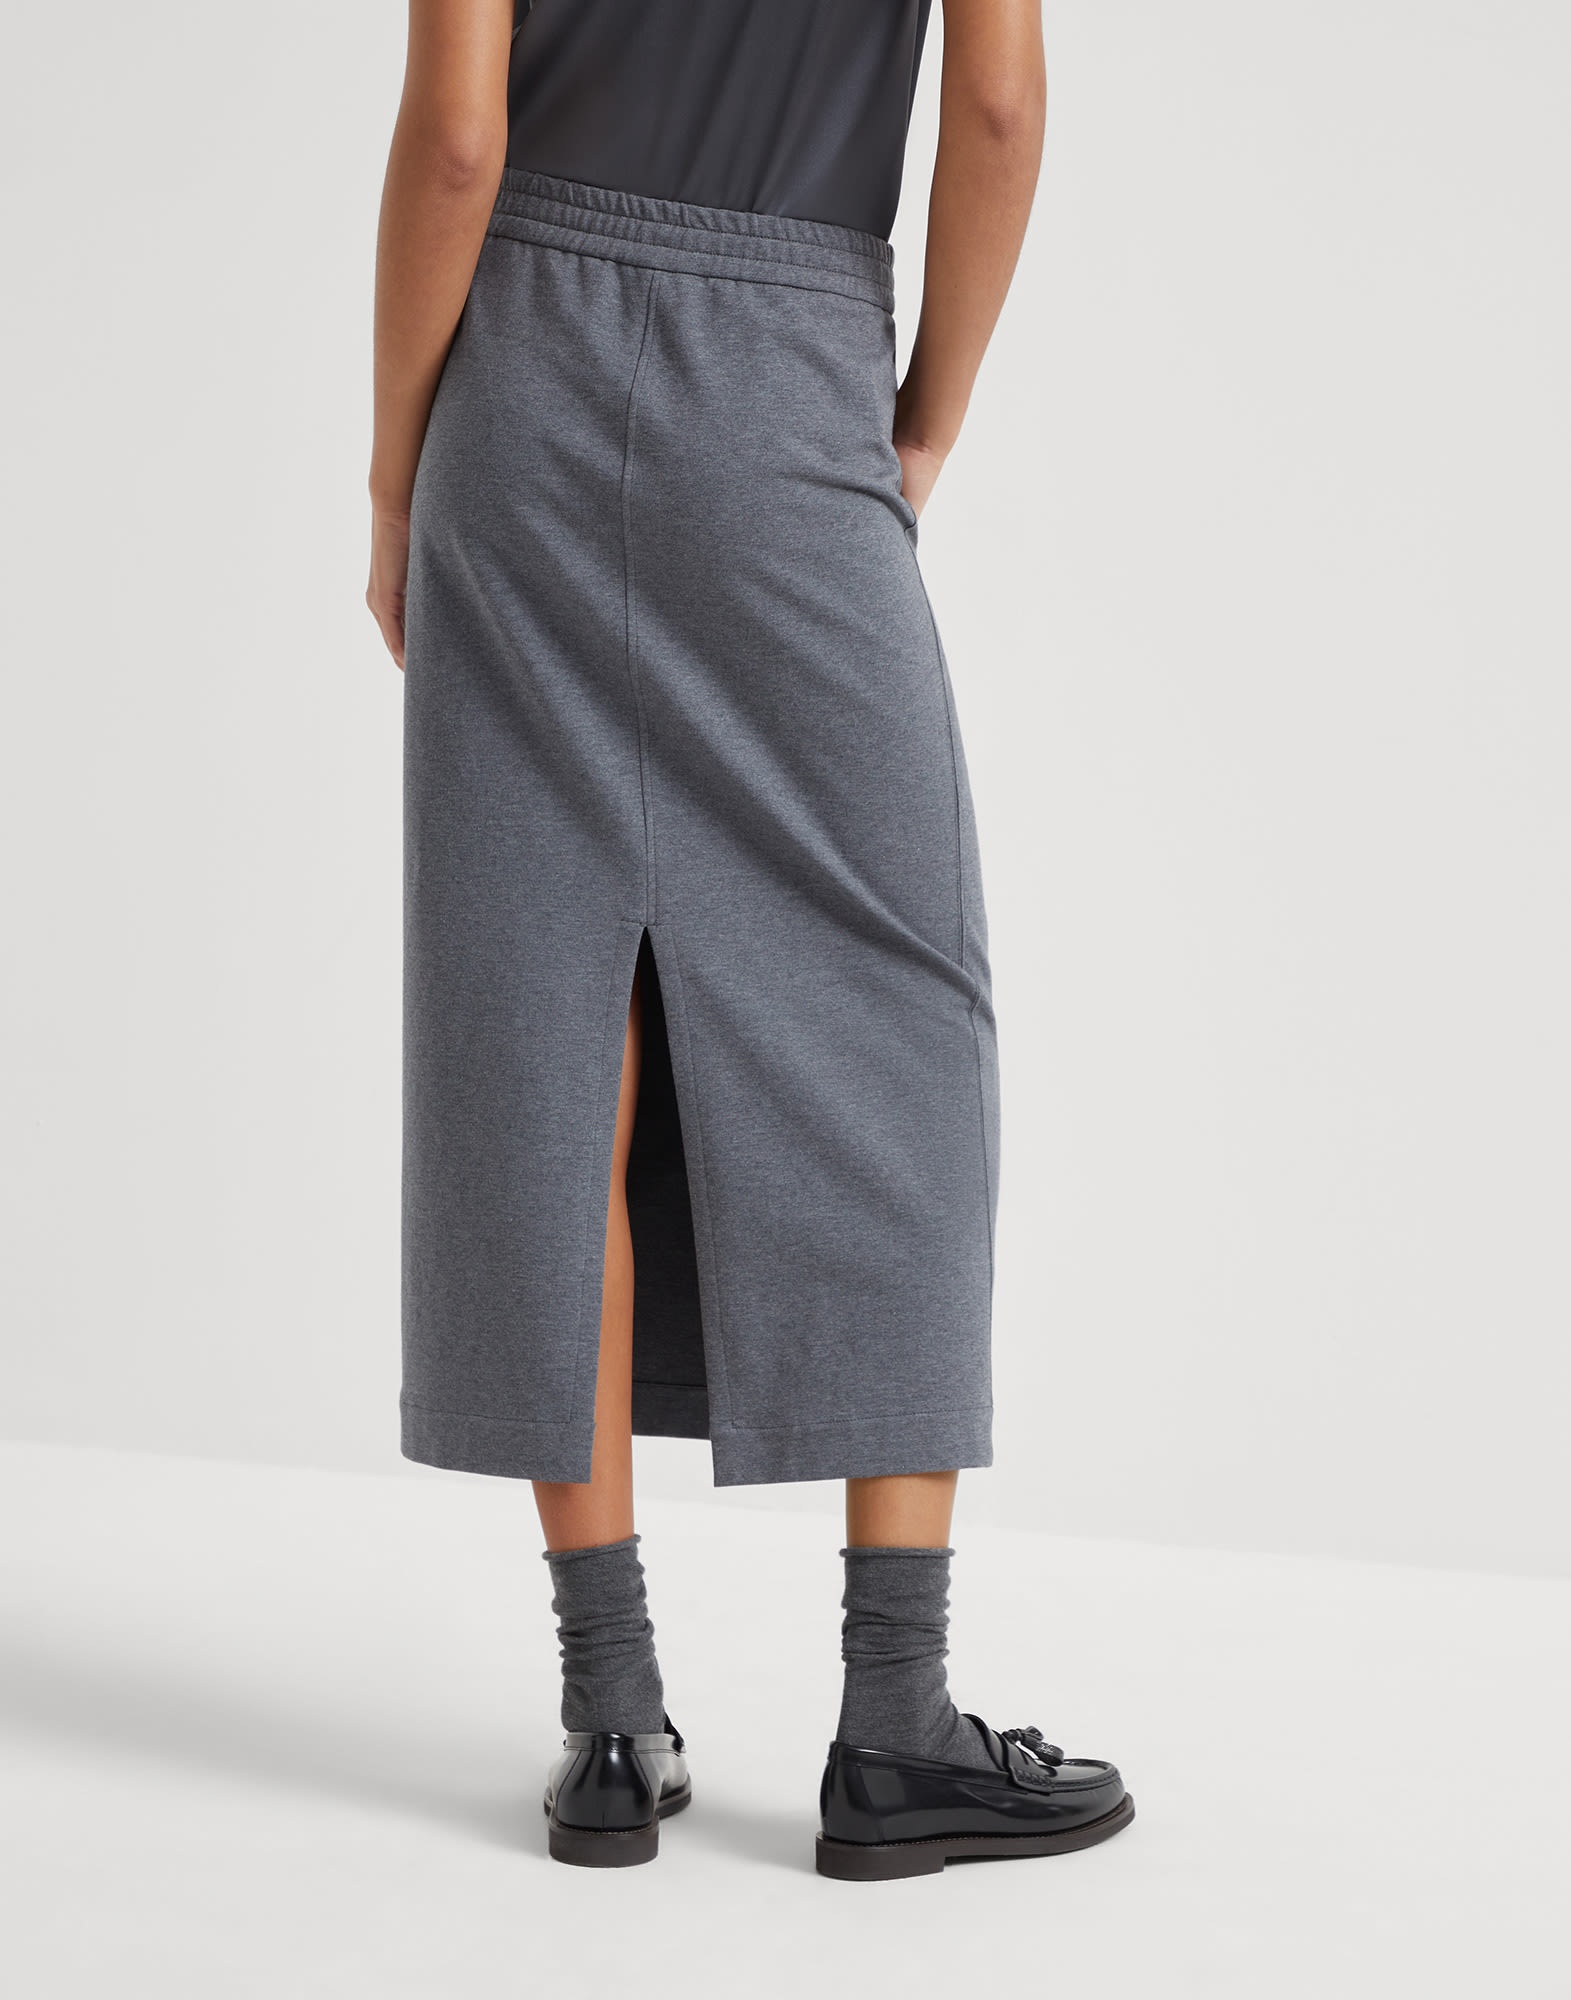 Stretch cotton lightweight French terry midi track skirt - 2